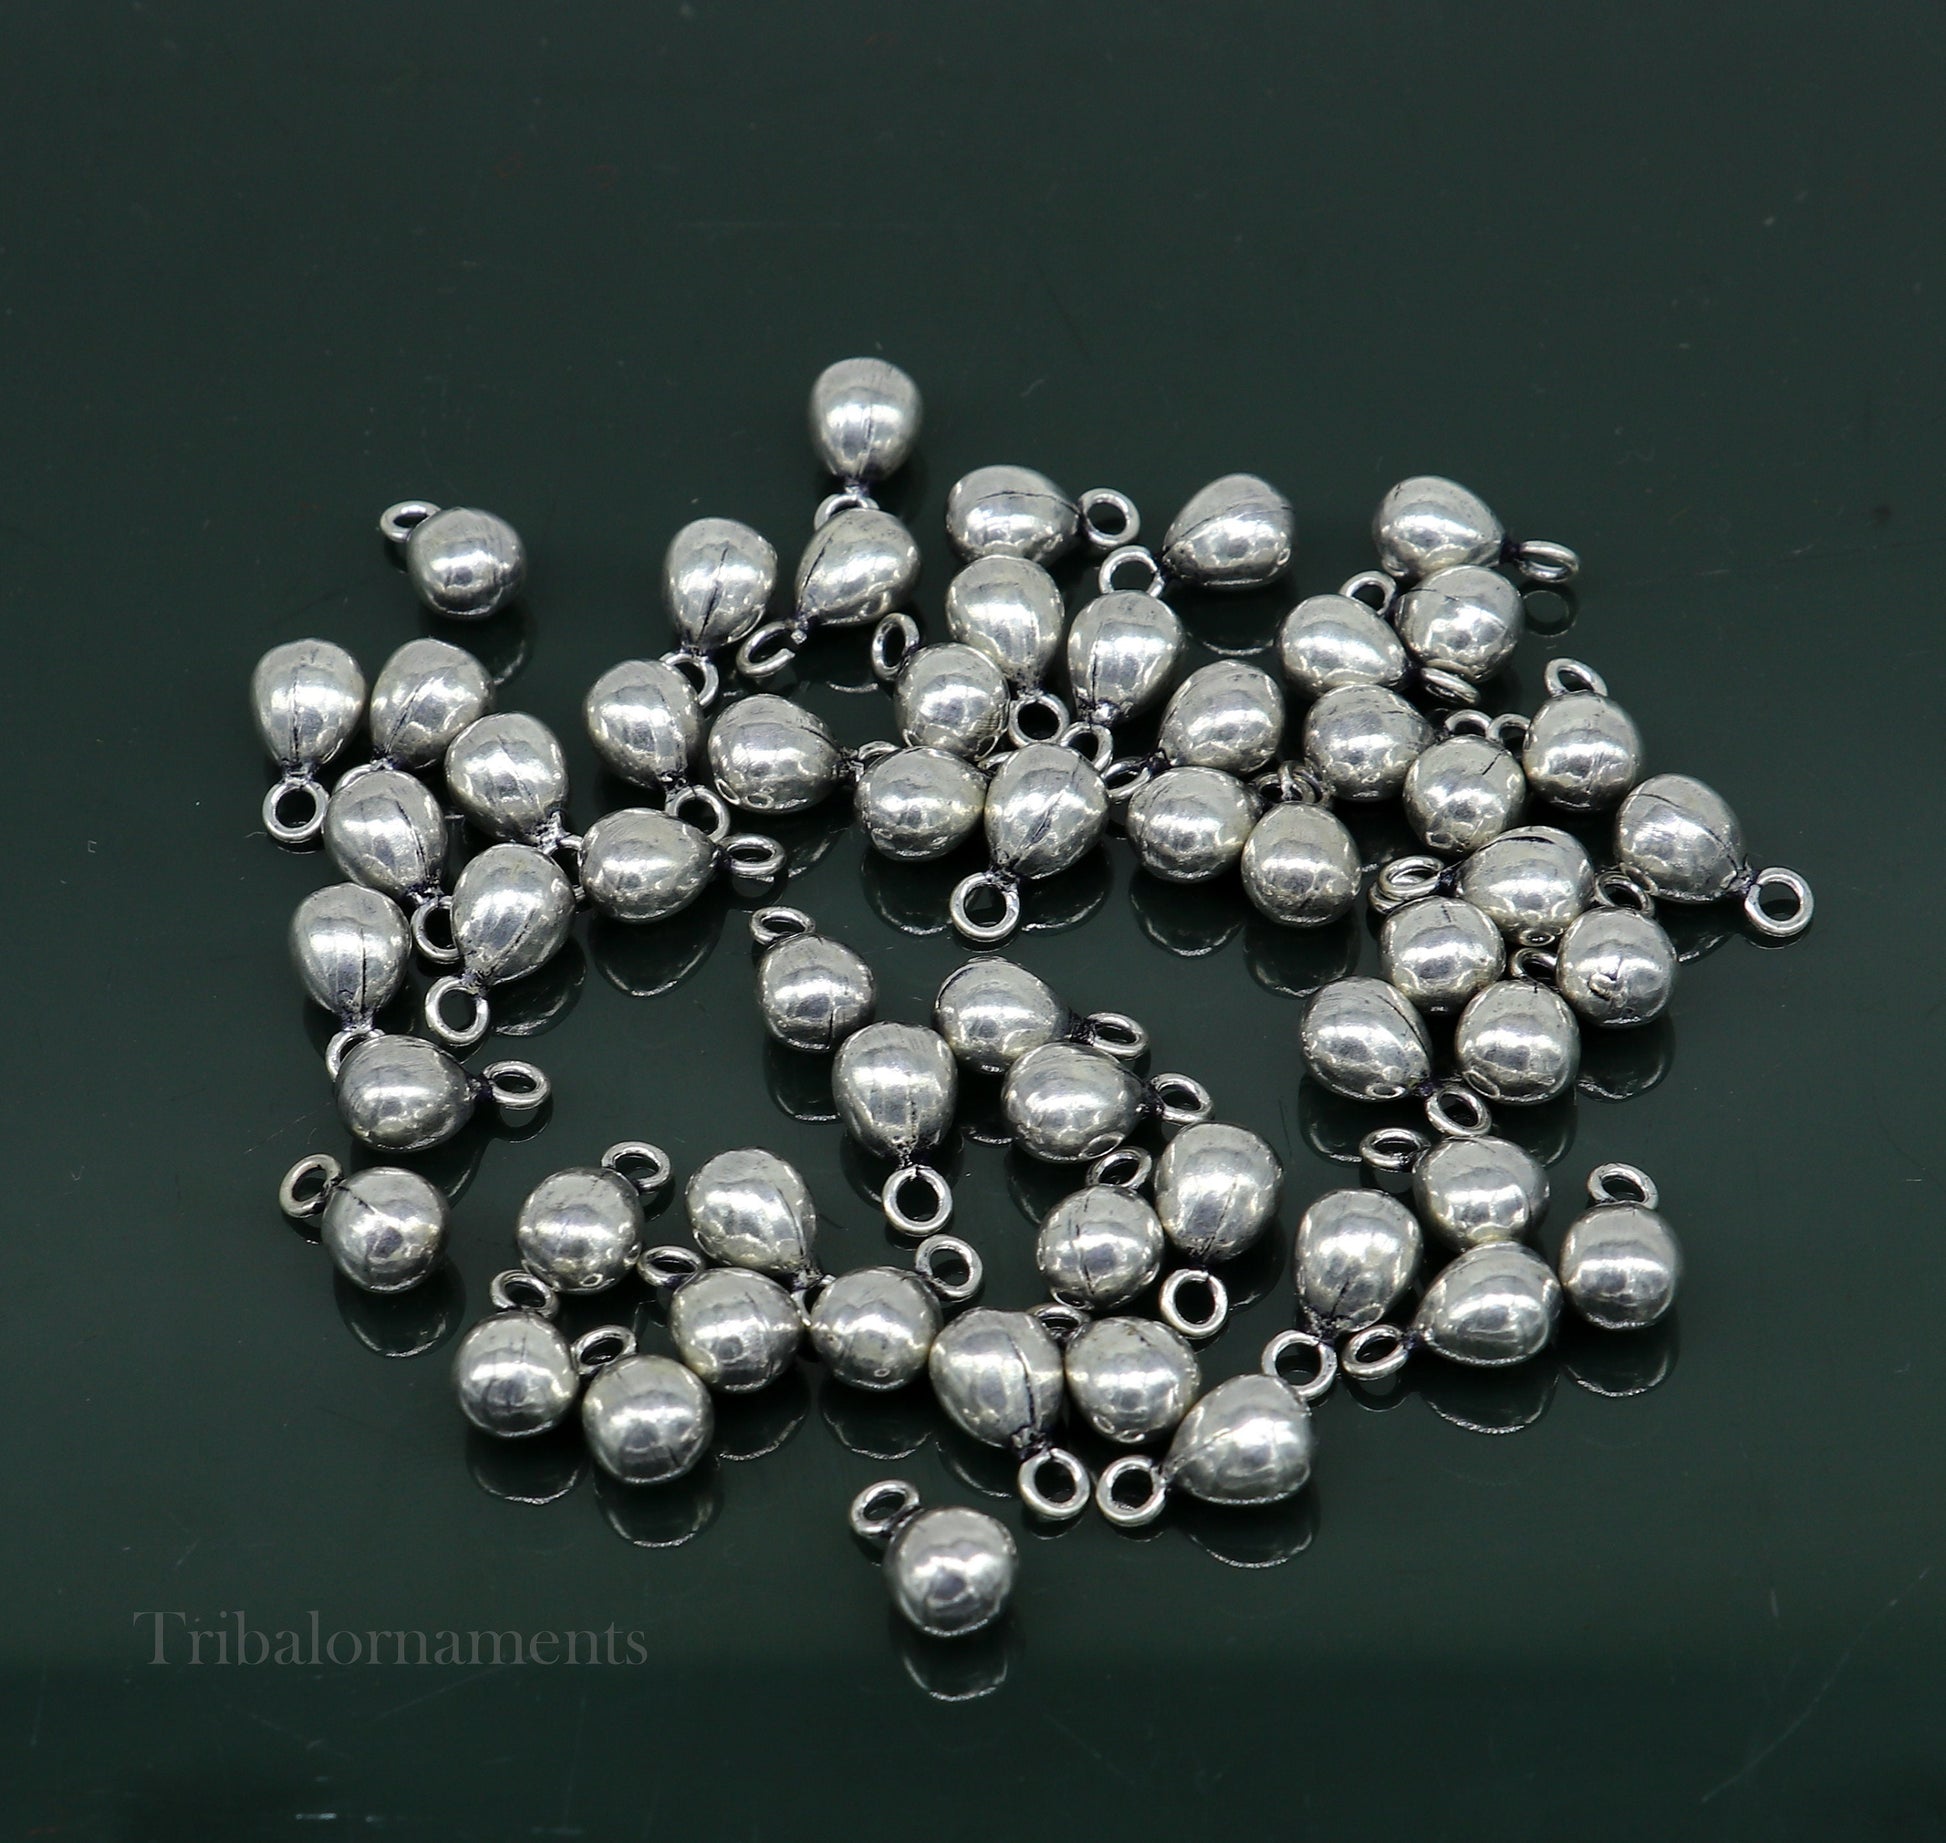 loose beads Lot 20 pieces vintage plain style handmade 925 sterling silver  beads or hanging drops for custom jewelry making ideas bd11